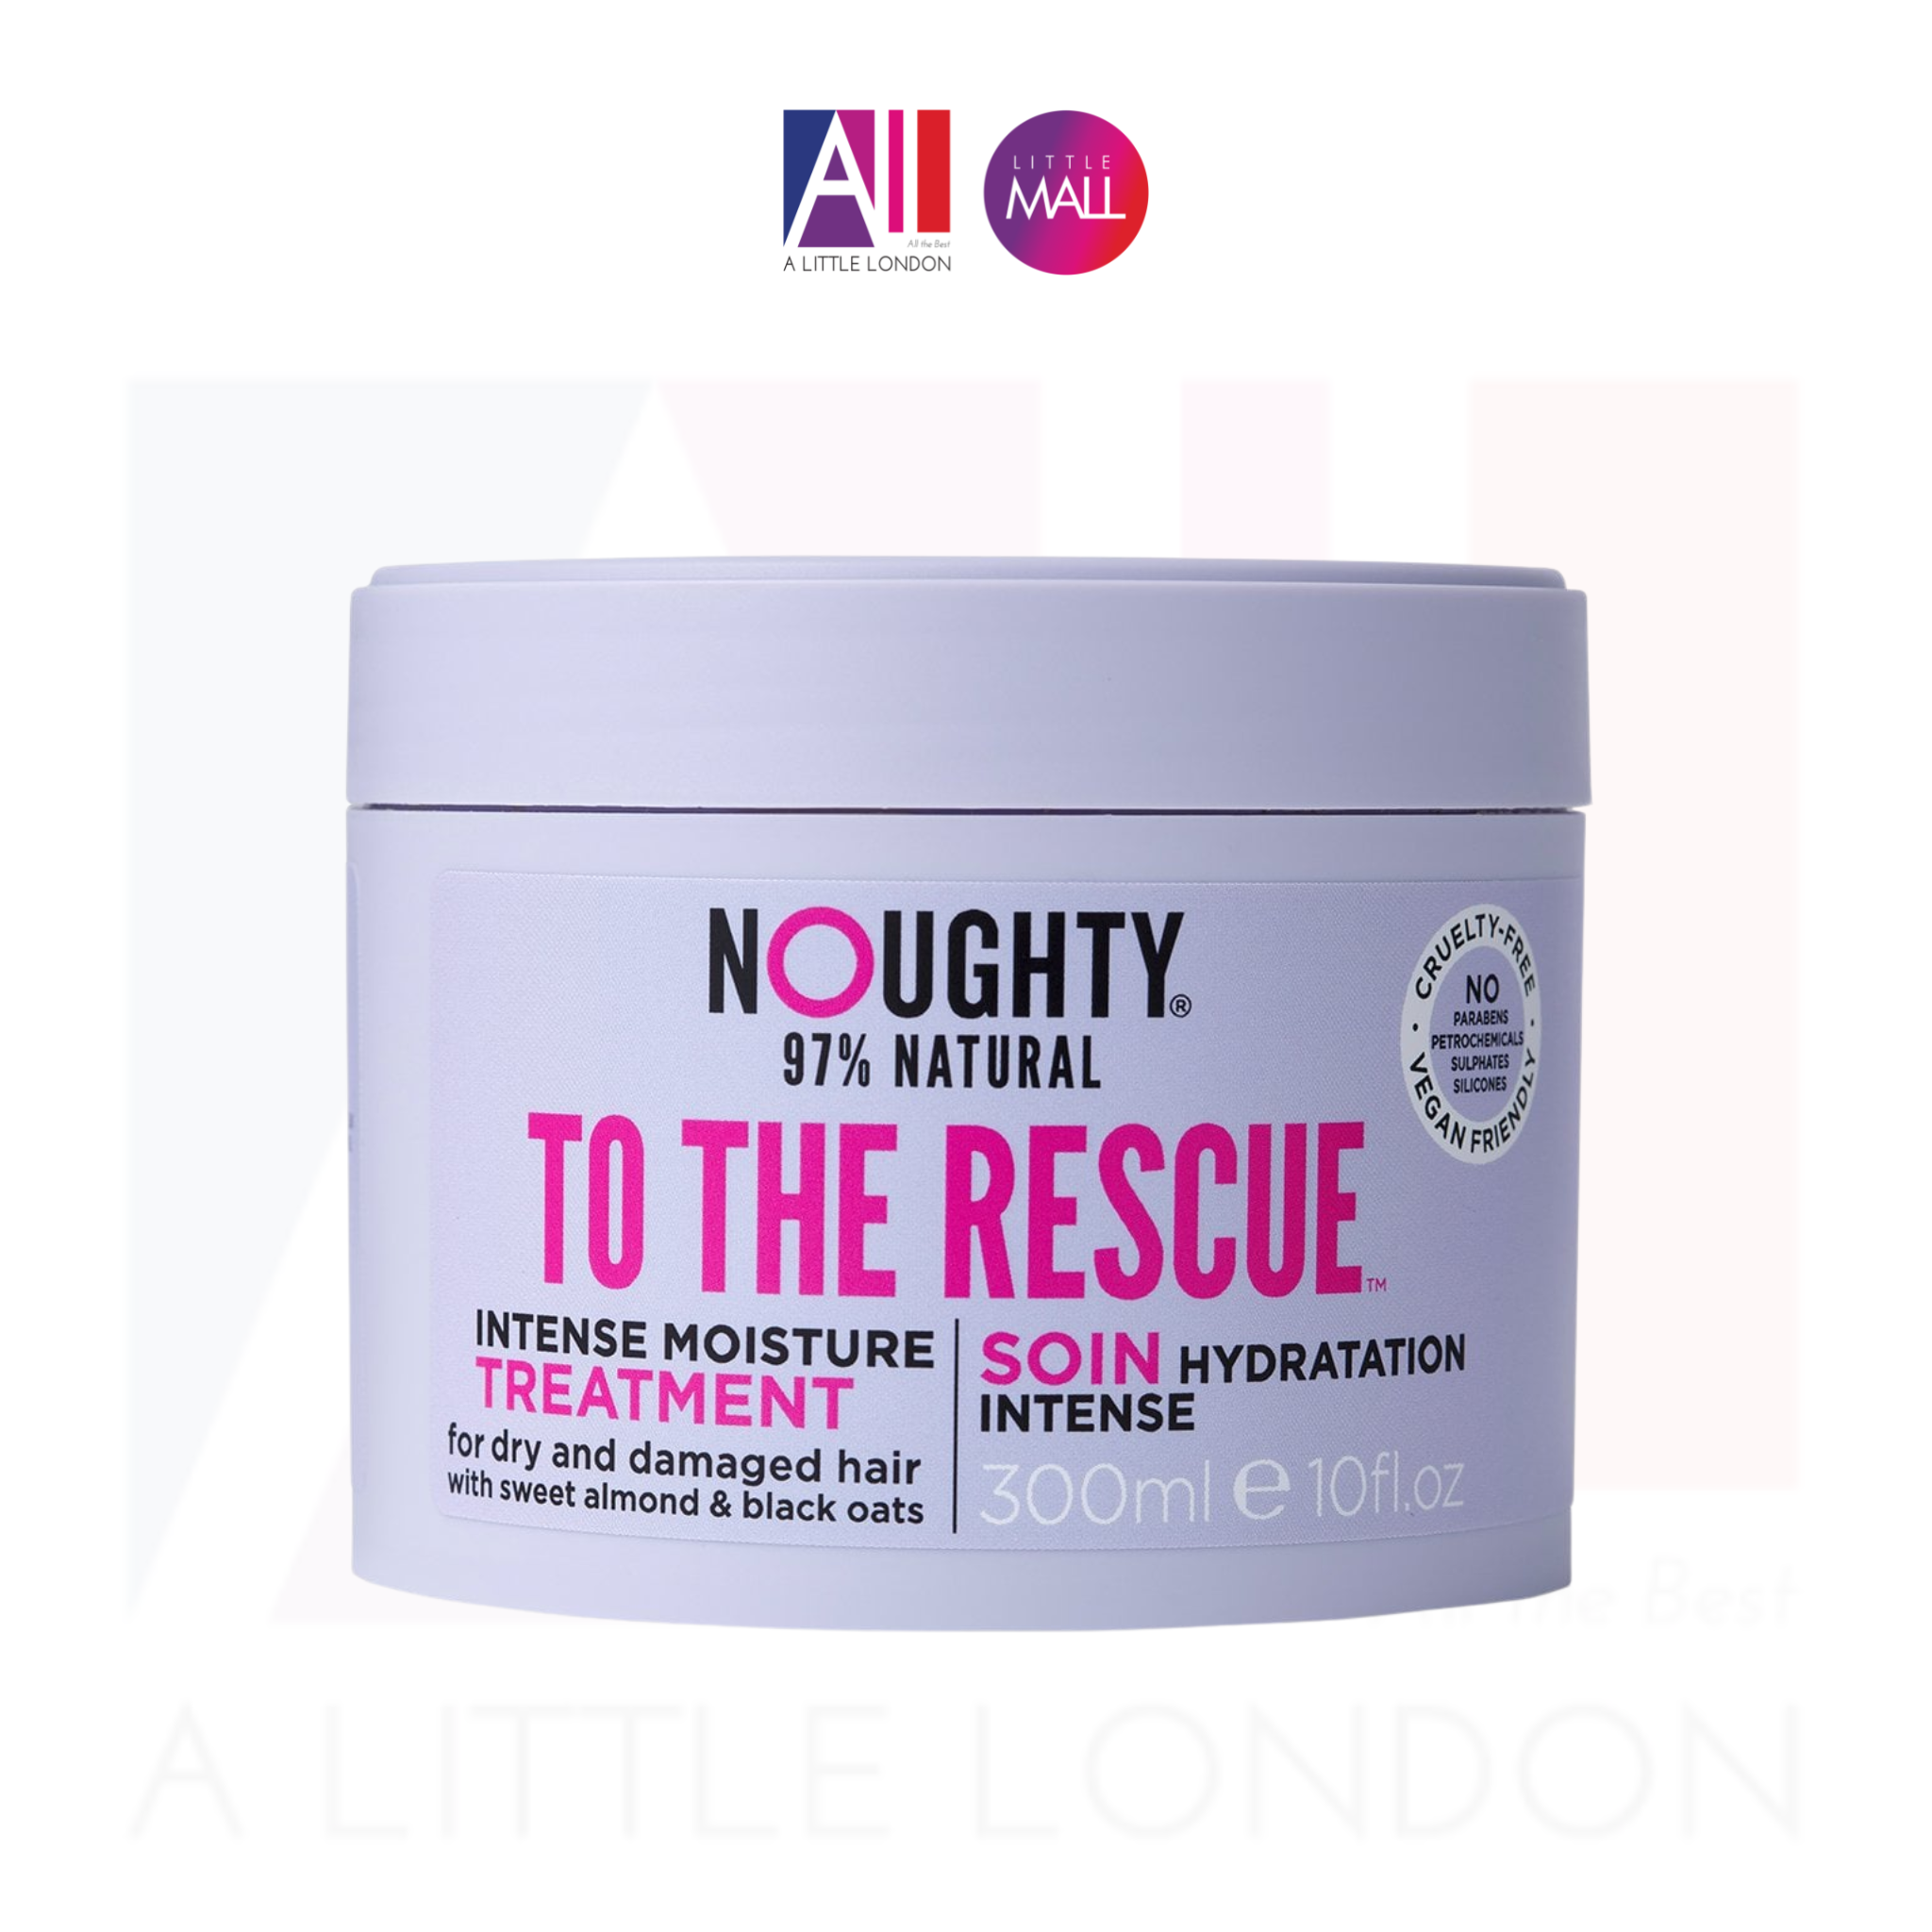 Ủ tóc phục hồi Noughty To the Rescue Intense Moisture Treatment 300ml (Bill Anh)